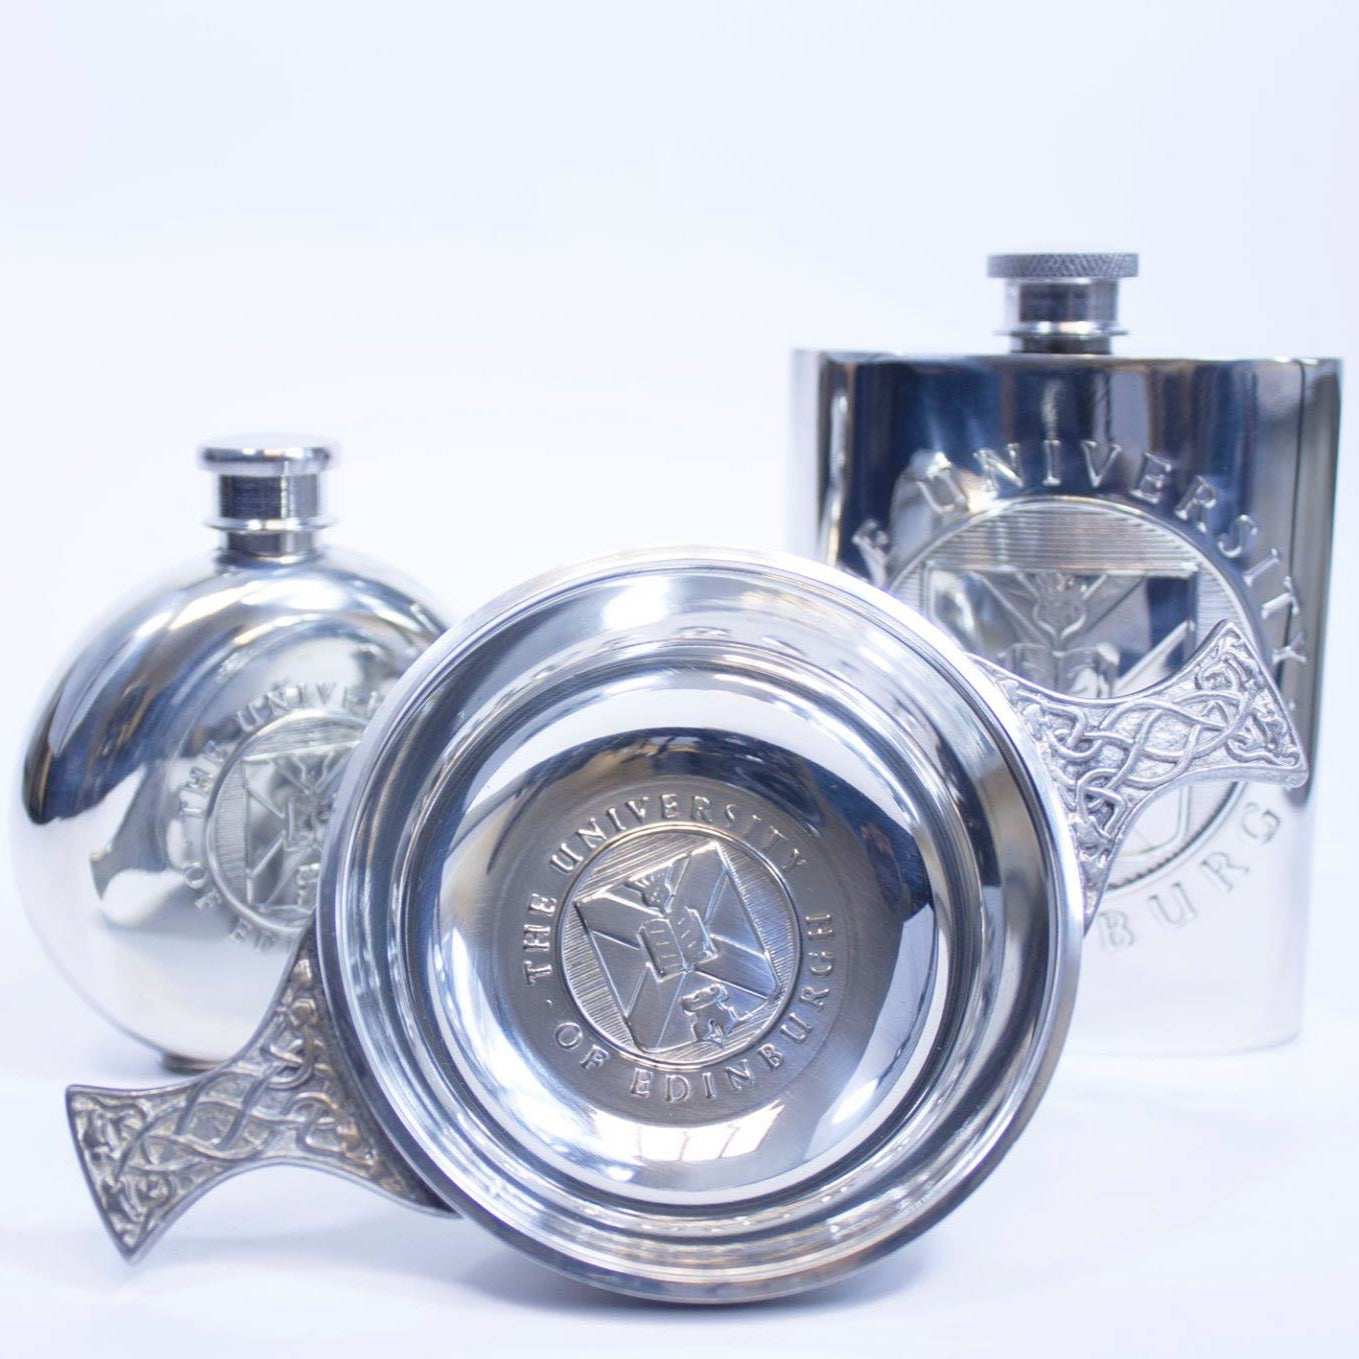 A collection of our pewter gifts including the Round Petwer Hip Flask, the Quaich and the Square Pewter Hip Flask.  